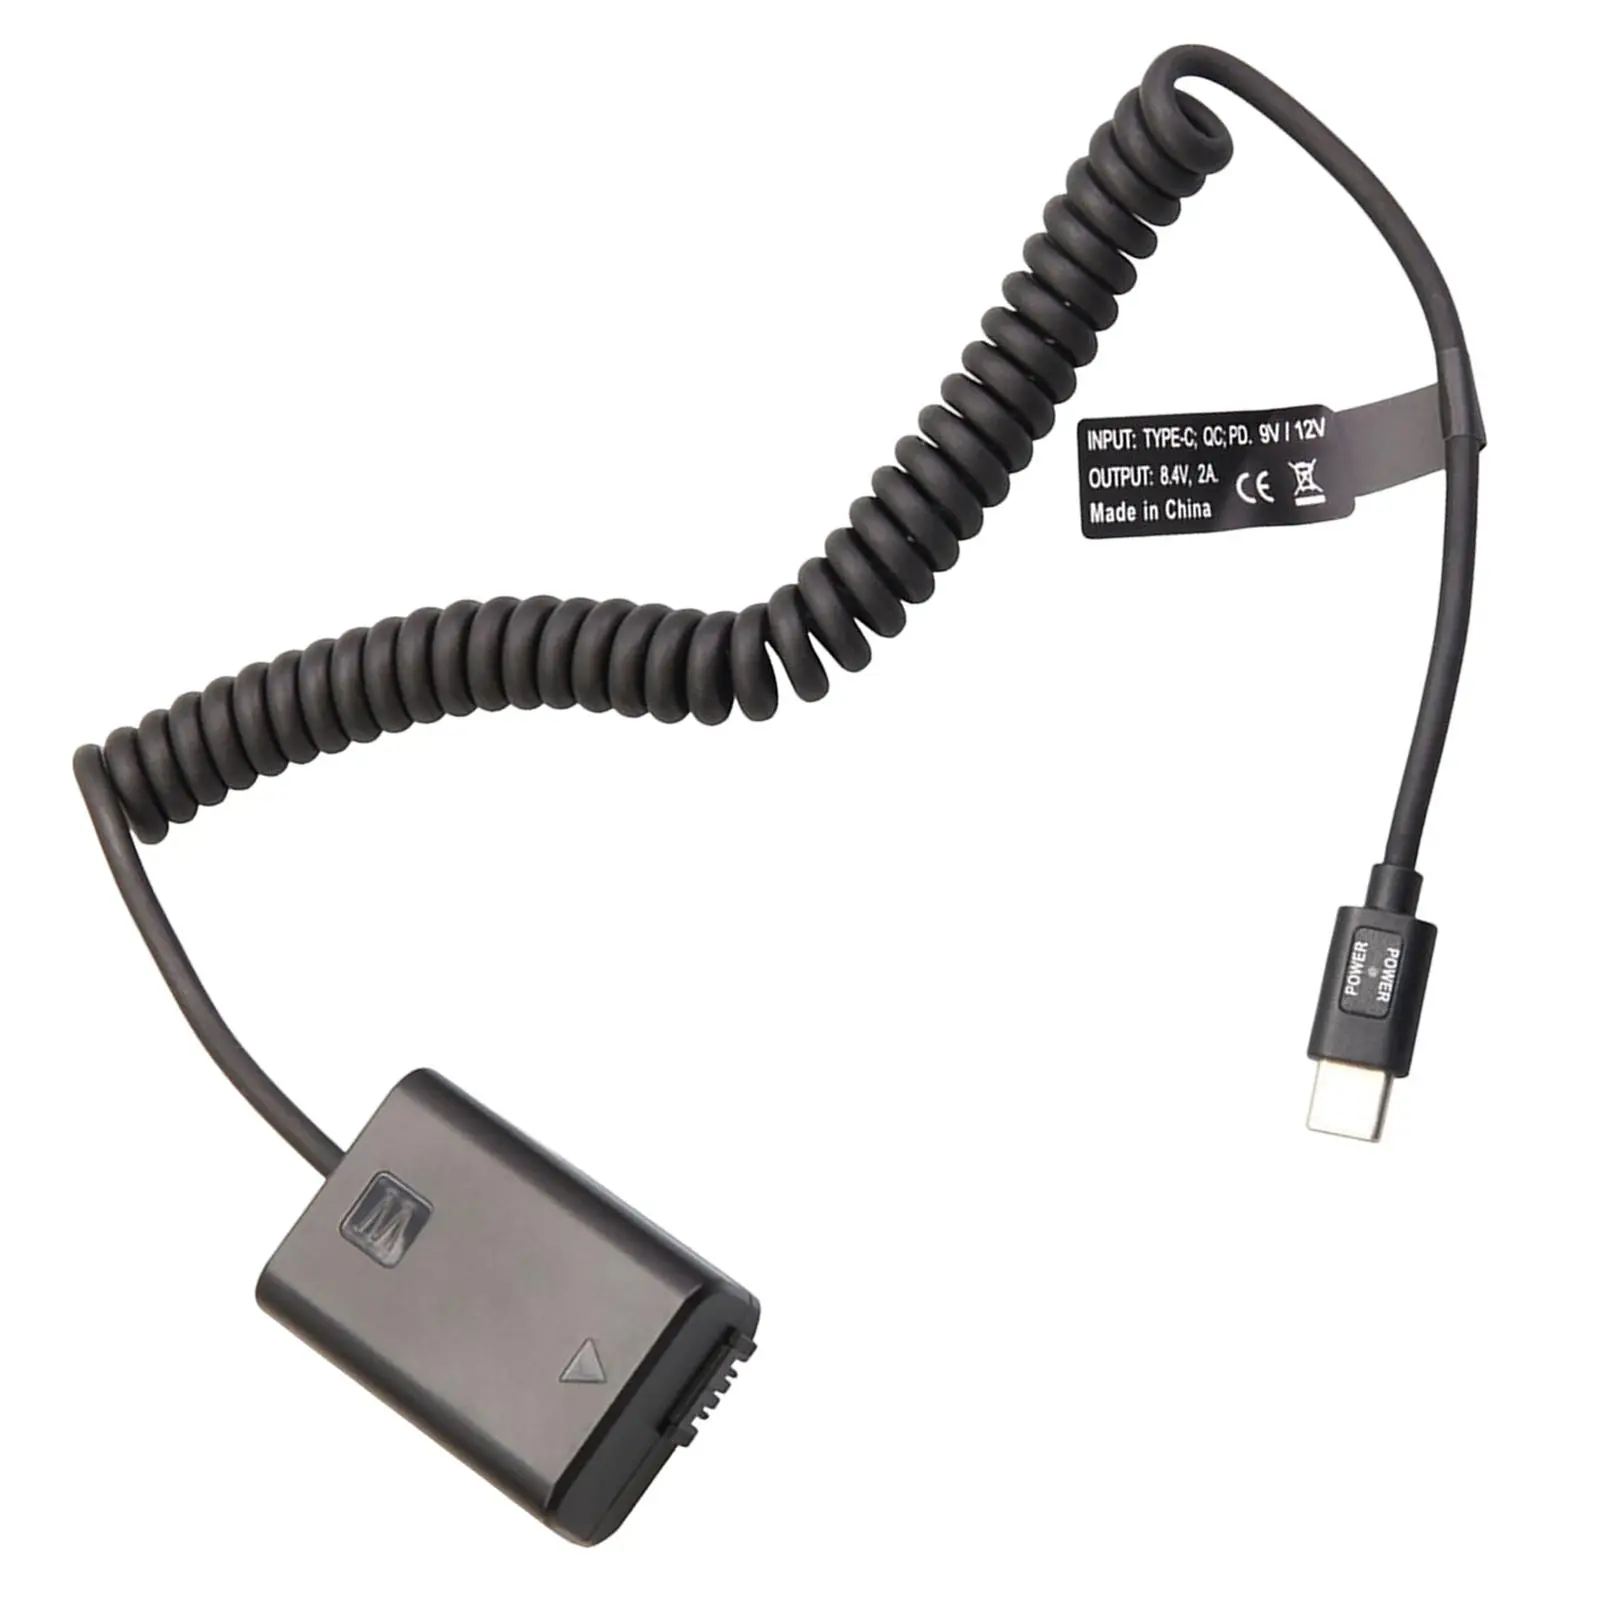 Np-Fw50 Dummy Battery Power Adapter with Type C Cable Replace for Sony A7M2 A6000 A5100 Cameras